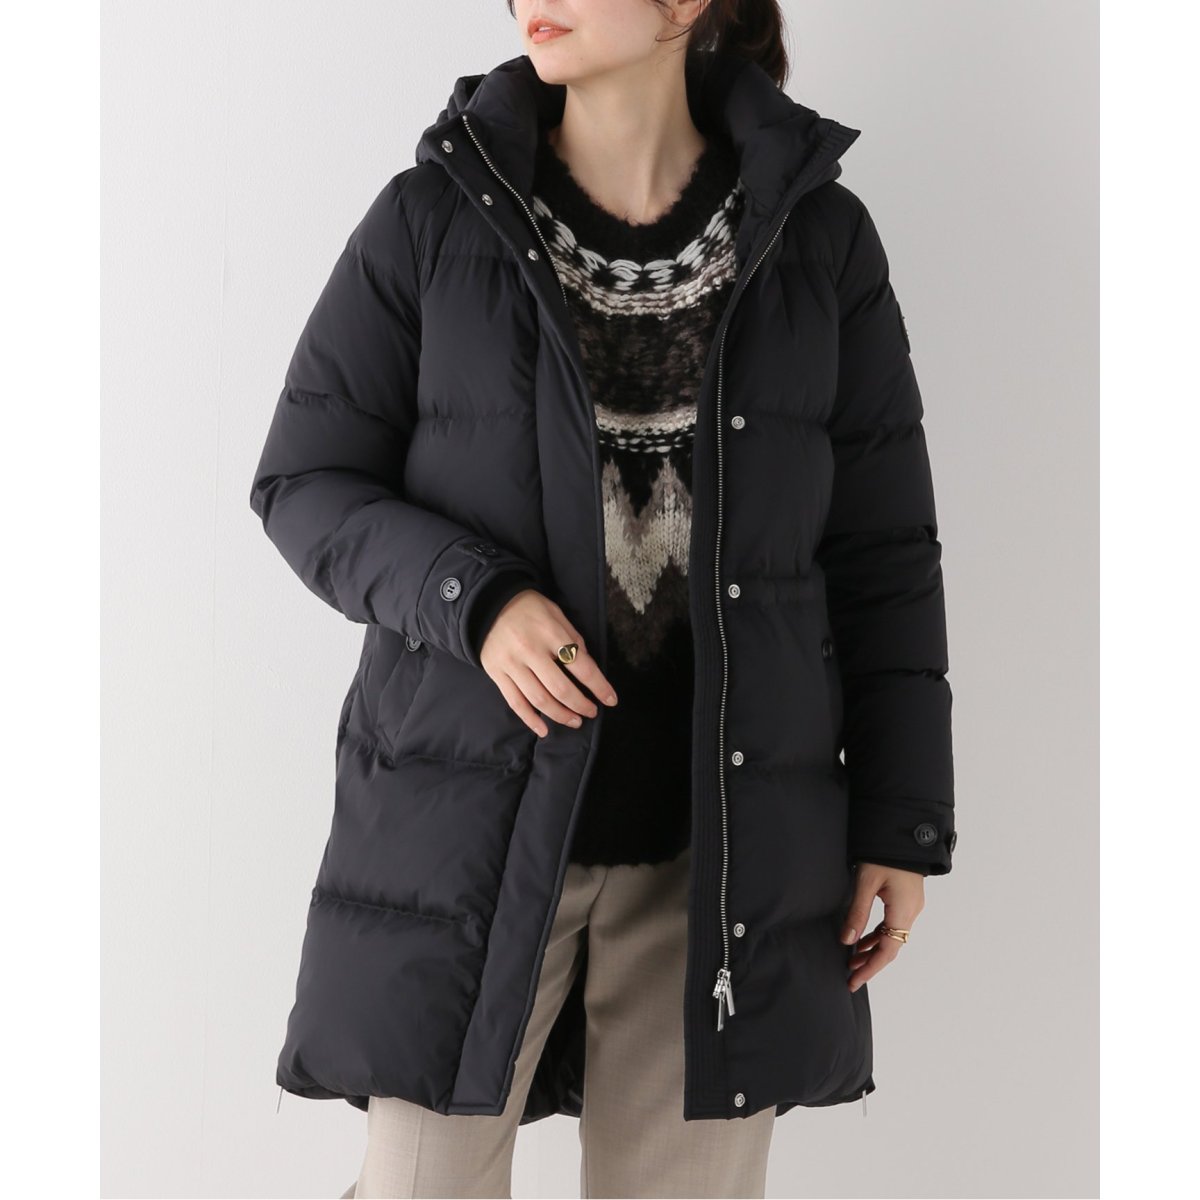 WOOLRICH/ウールリッチ】ALSEA PUFFY PARKA | イエナ(IENA